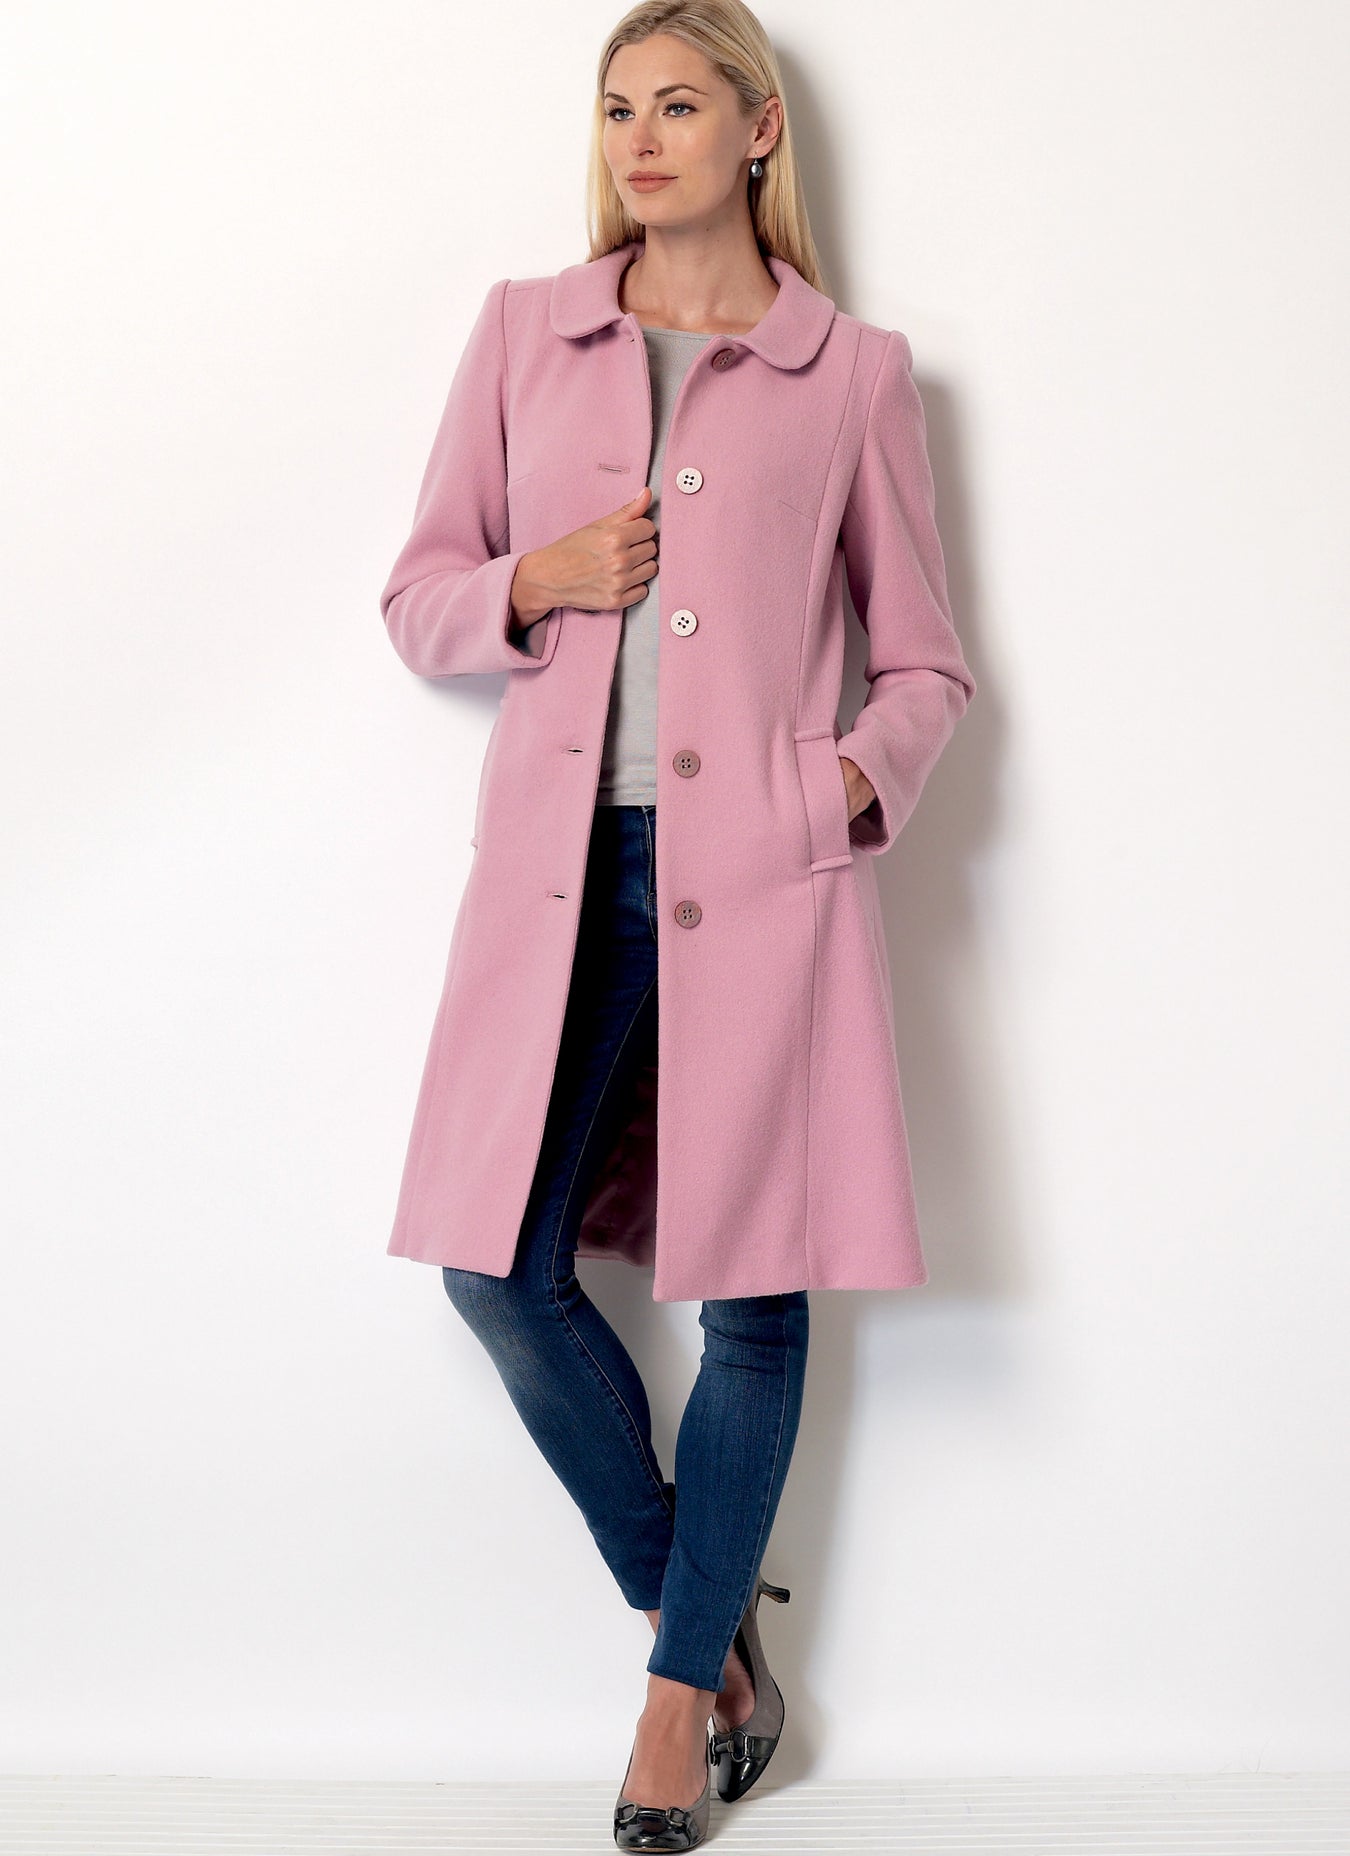 choice of sewing patterns for coats and jackets